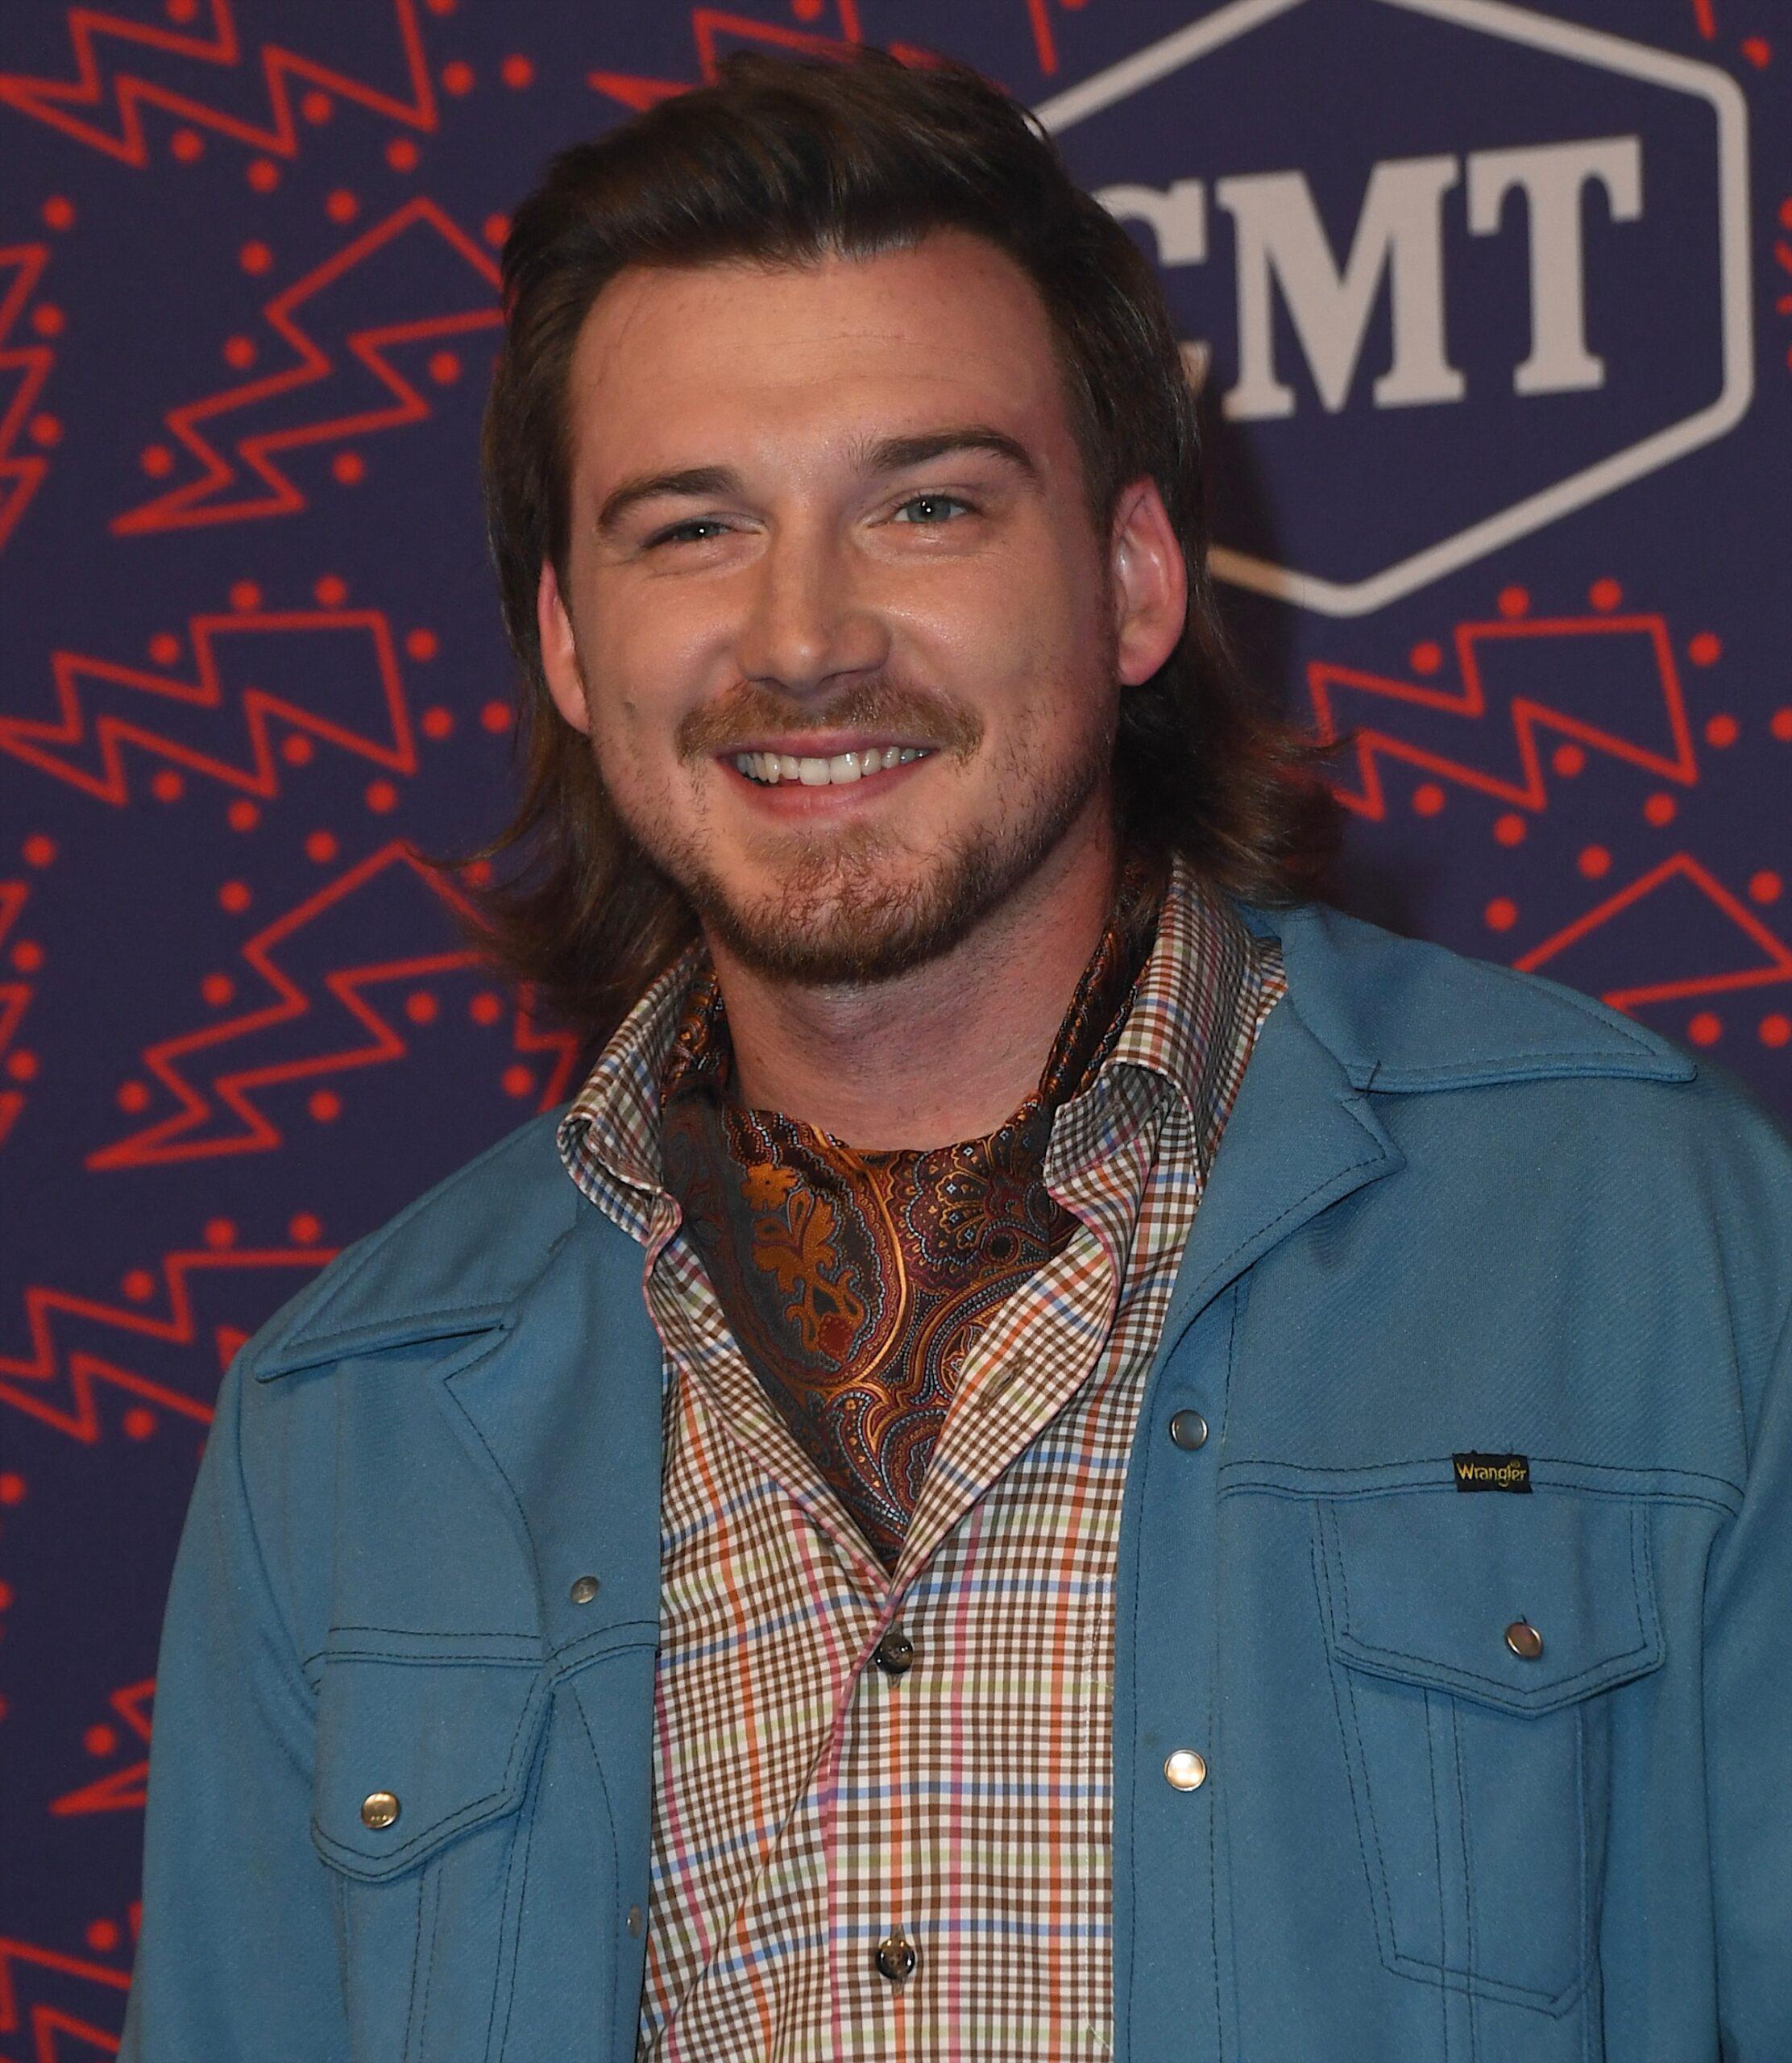 Morgan Wallen gets a No. 1 hit on country radio days after his arrest